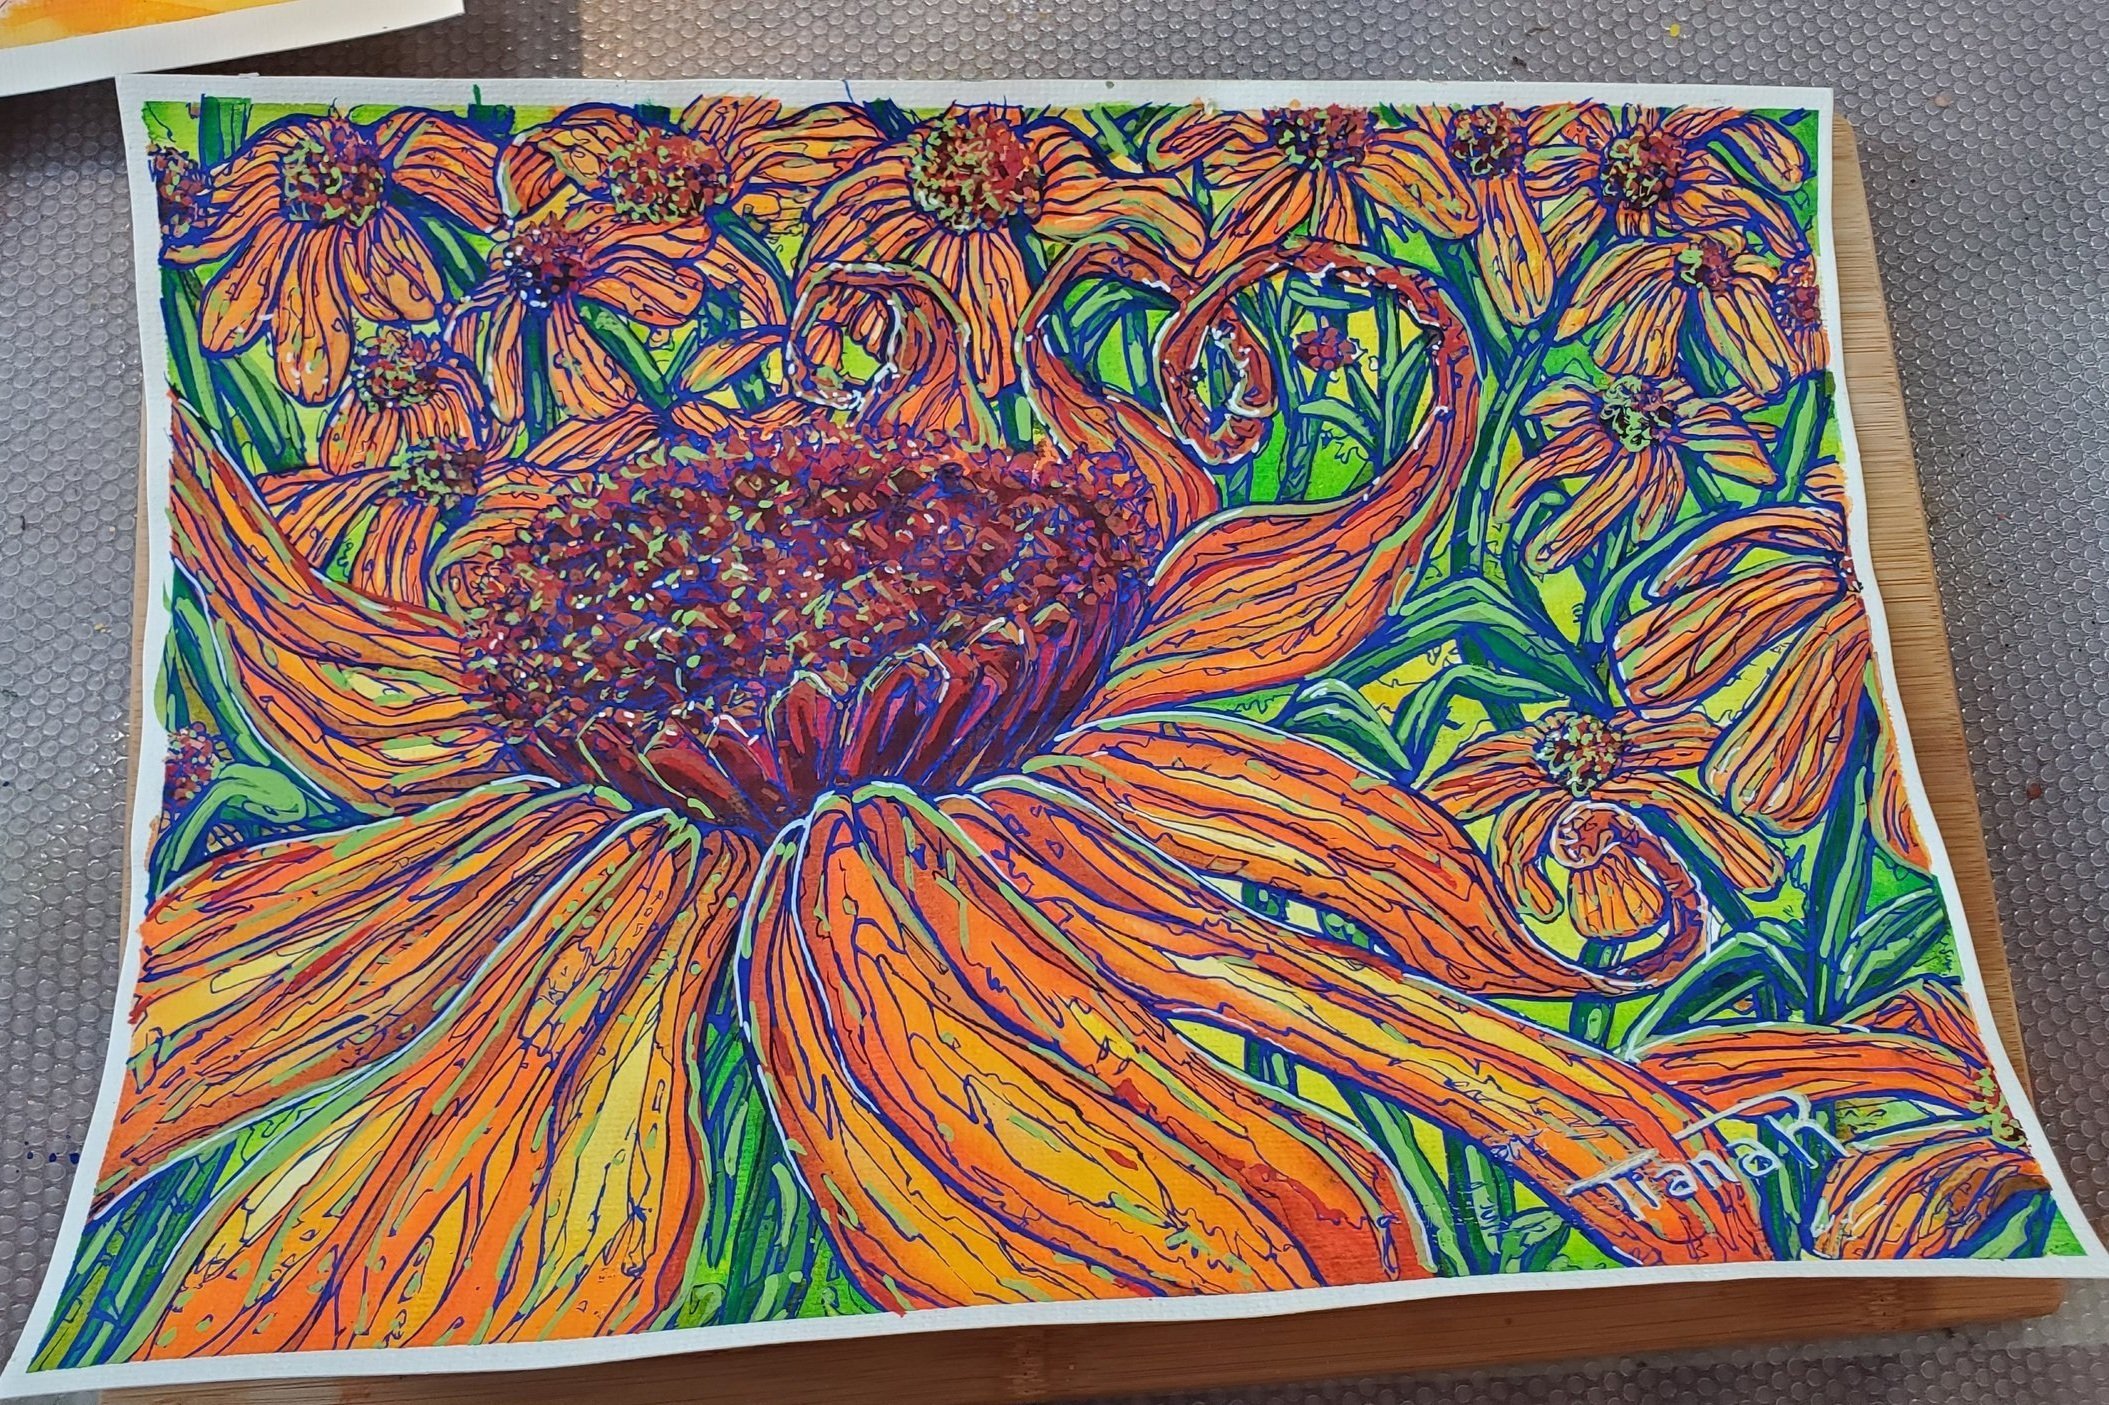   An image of Tiana Robinson’s painting. An elaborate painting of a large flower, petals spread open, in red, orange and blue. Behind the large flower are smaller flowers lining the background.  